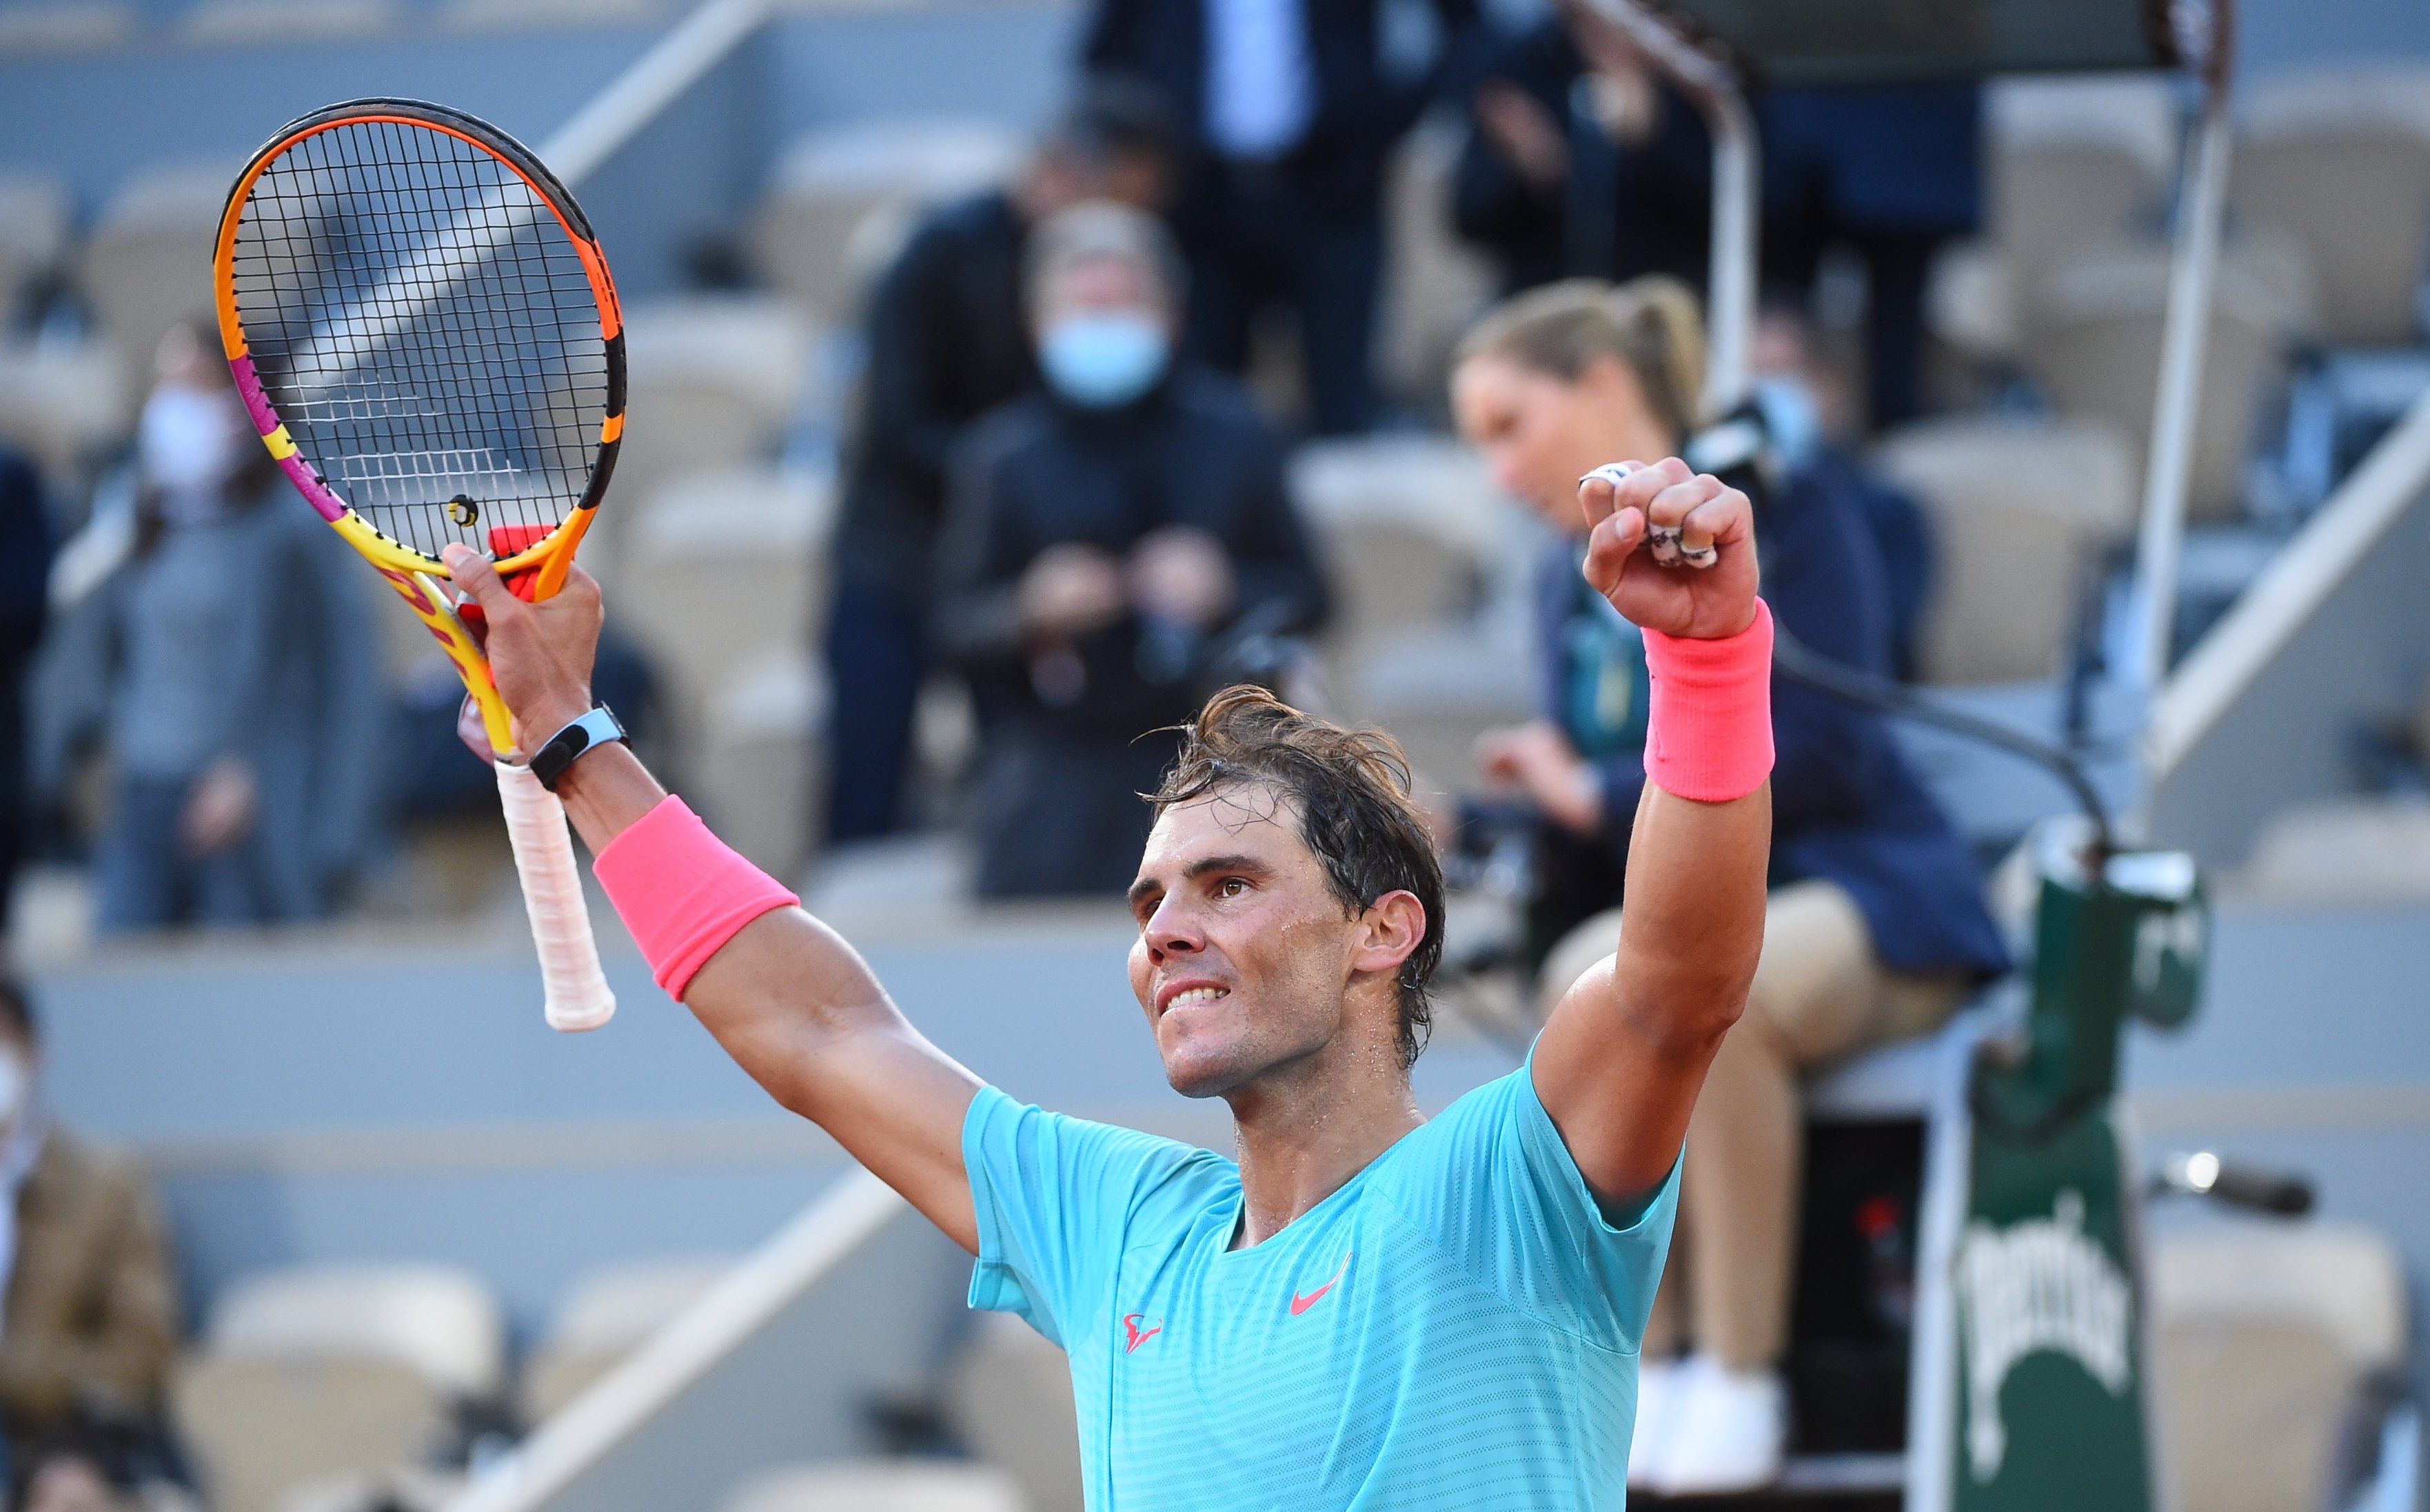 Nadal sweeps into 13th French Open final